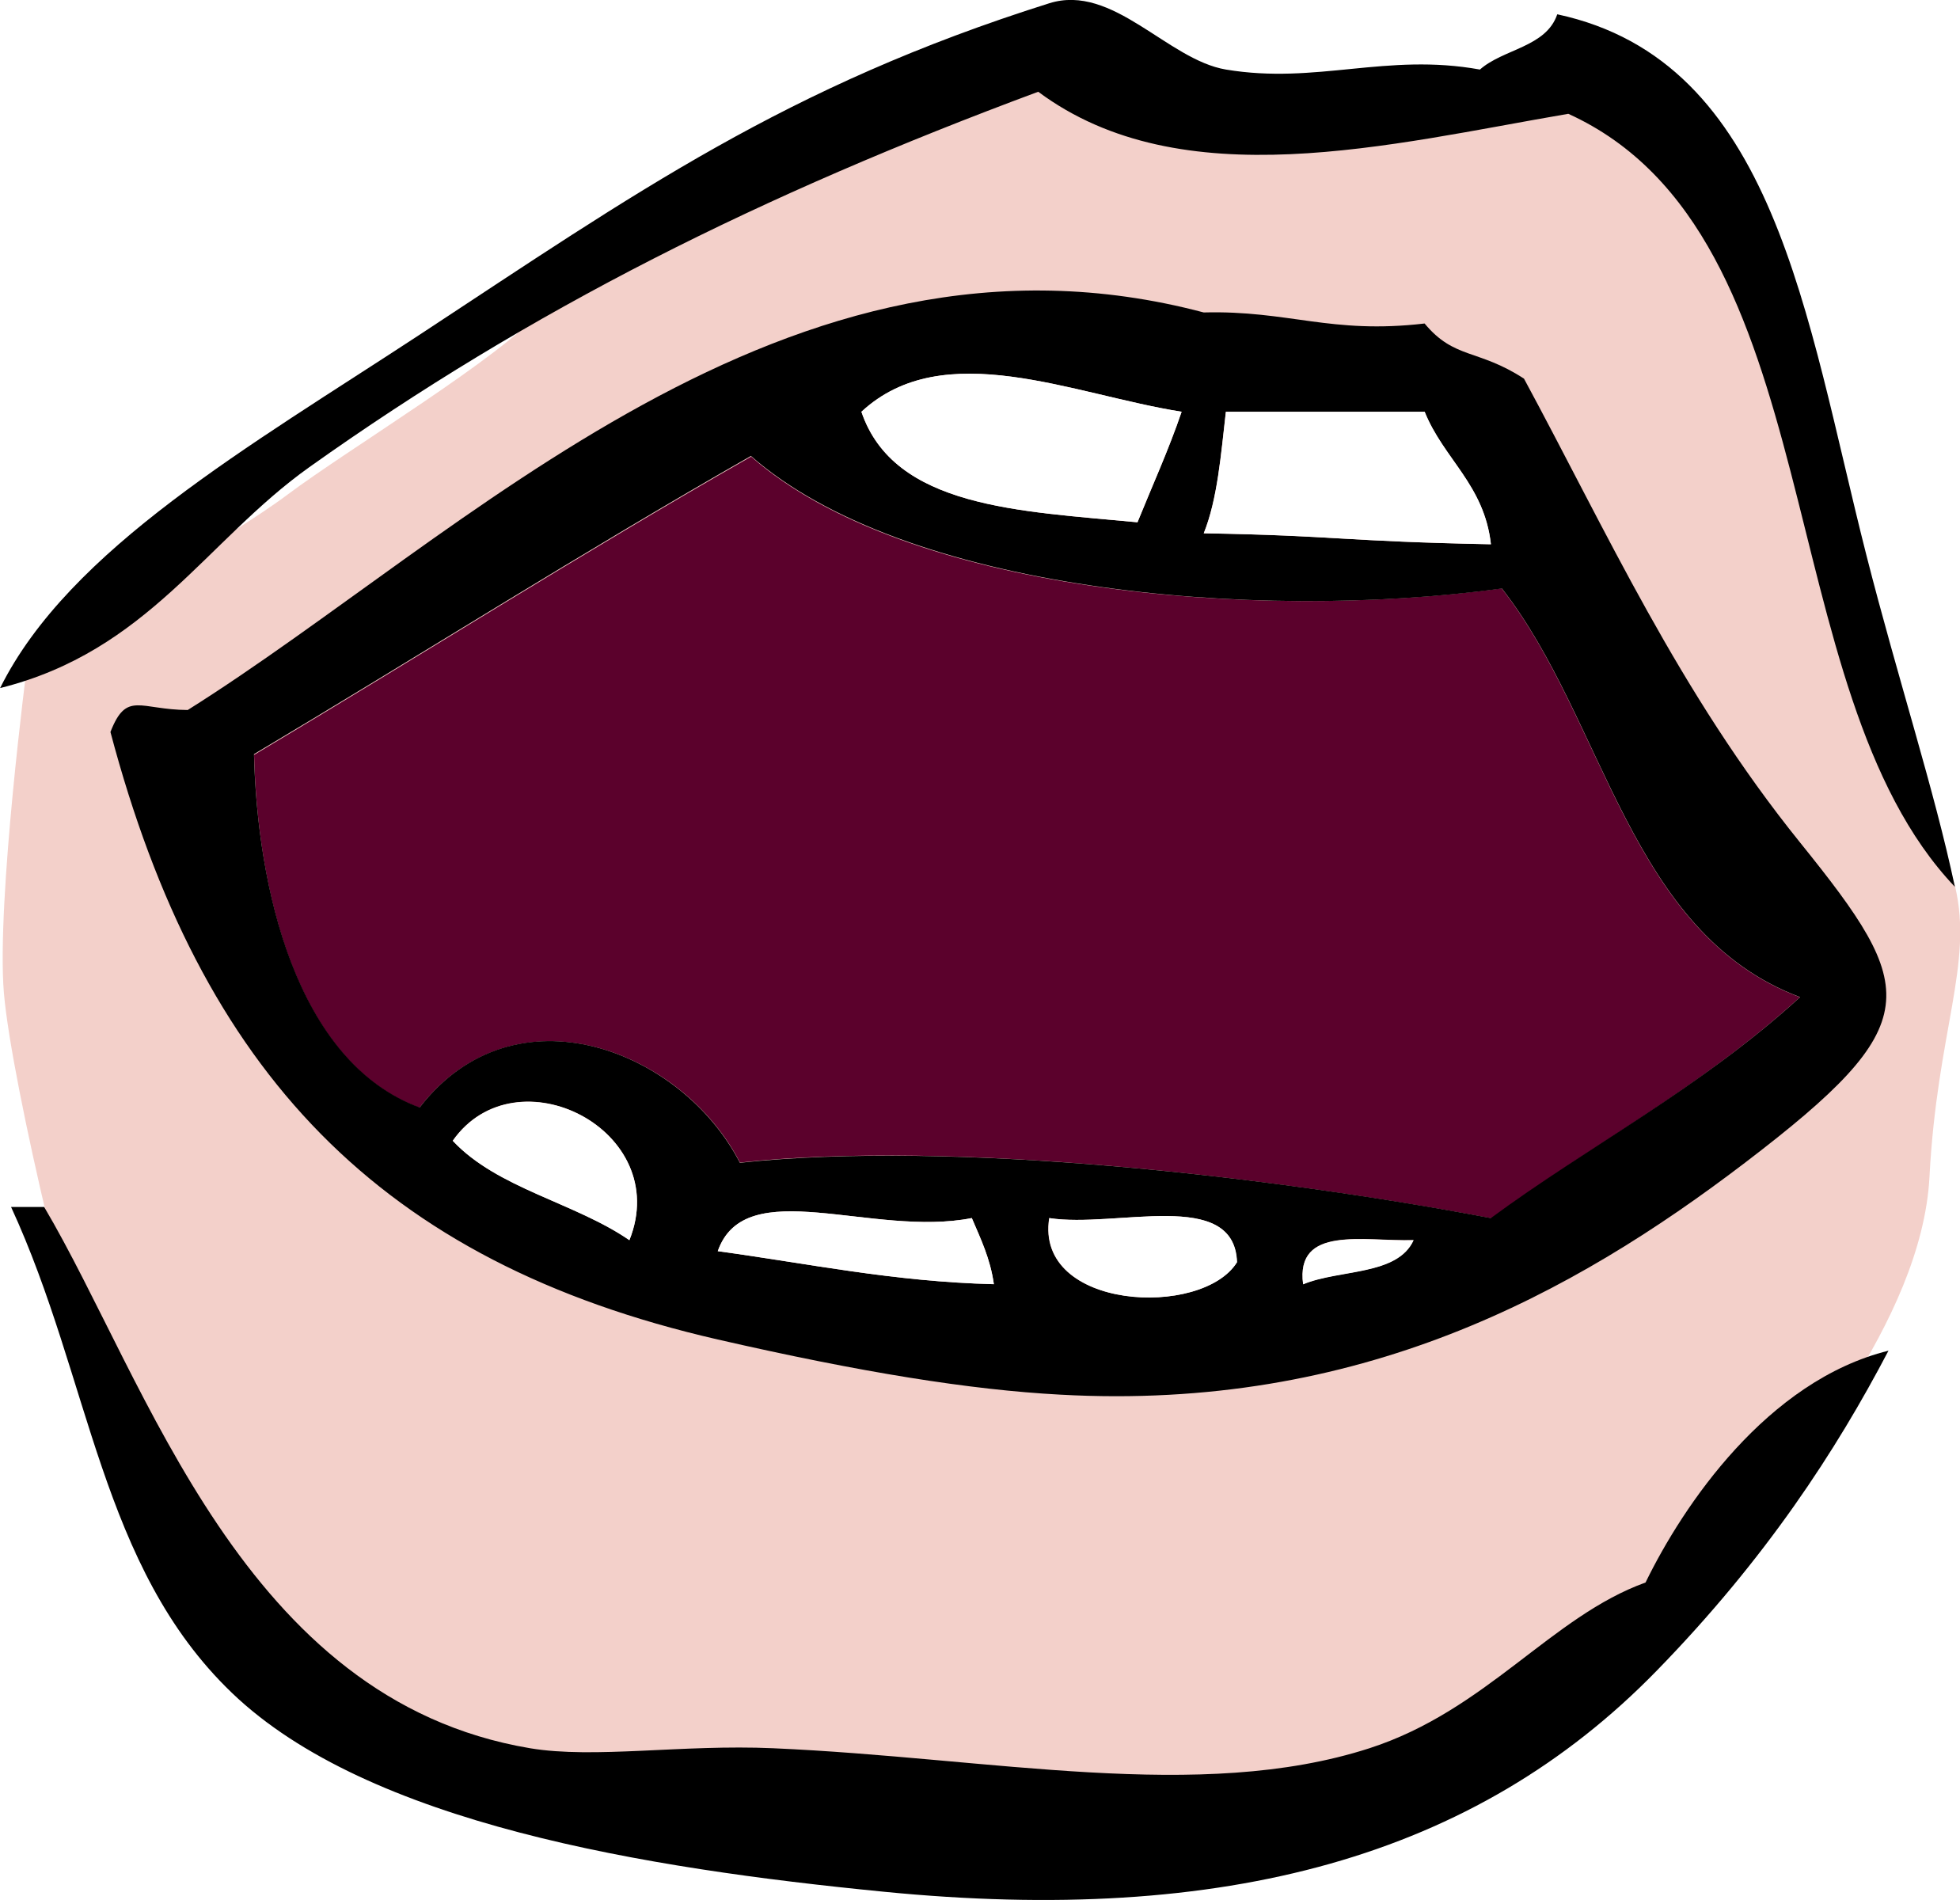 mouth speaking clipart - Clipground